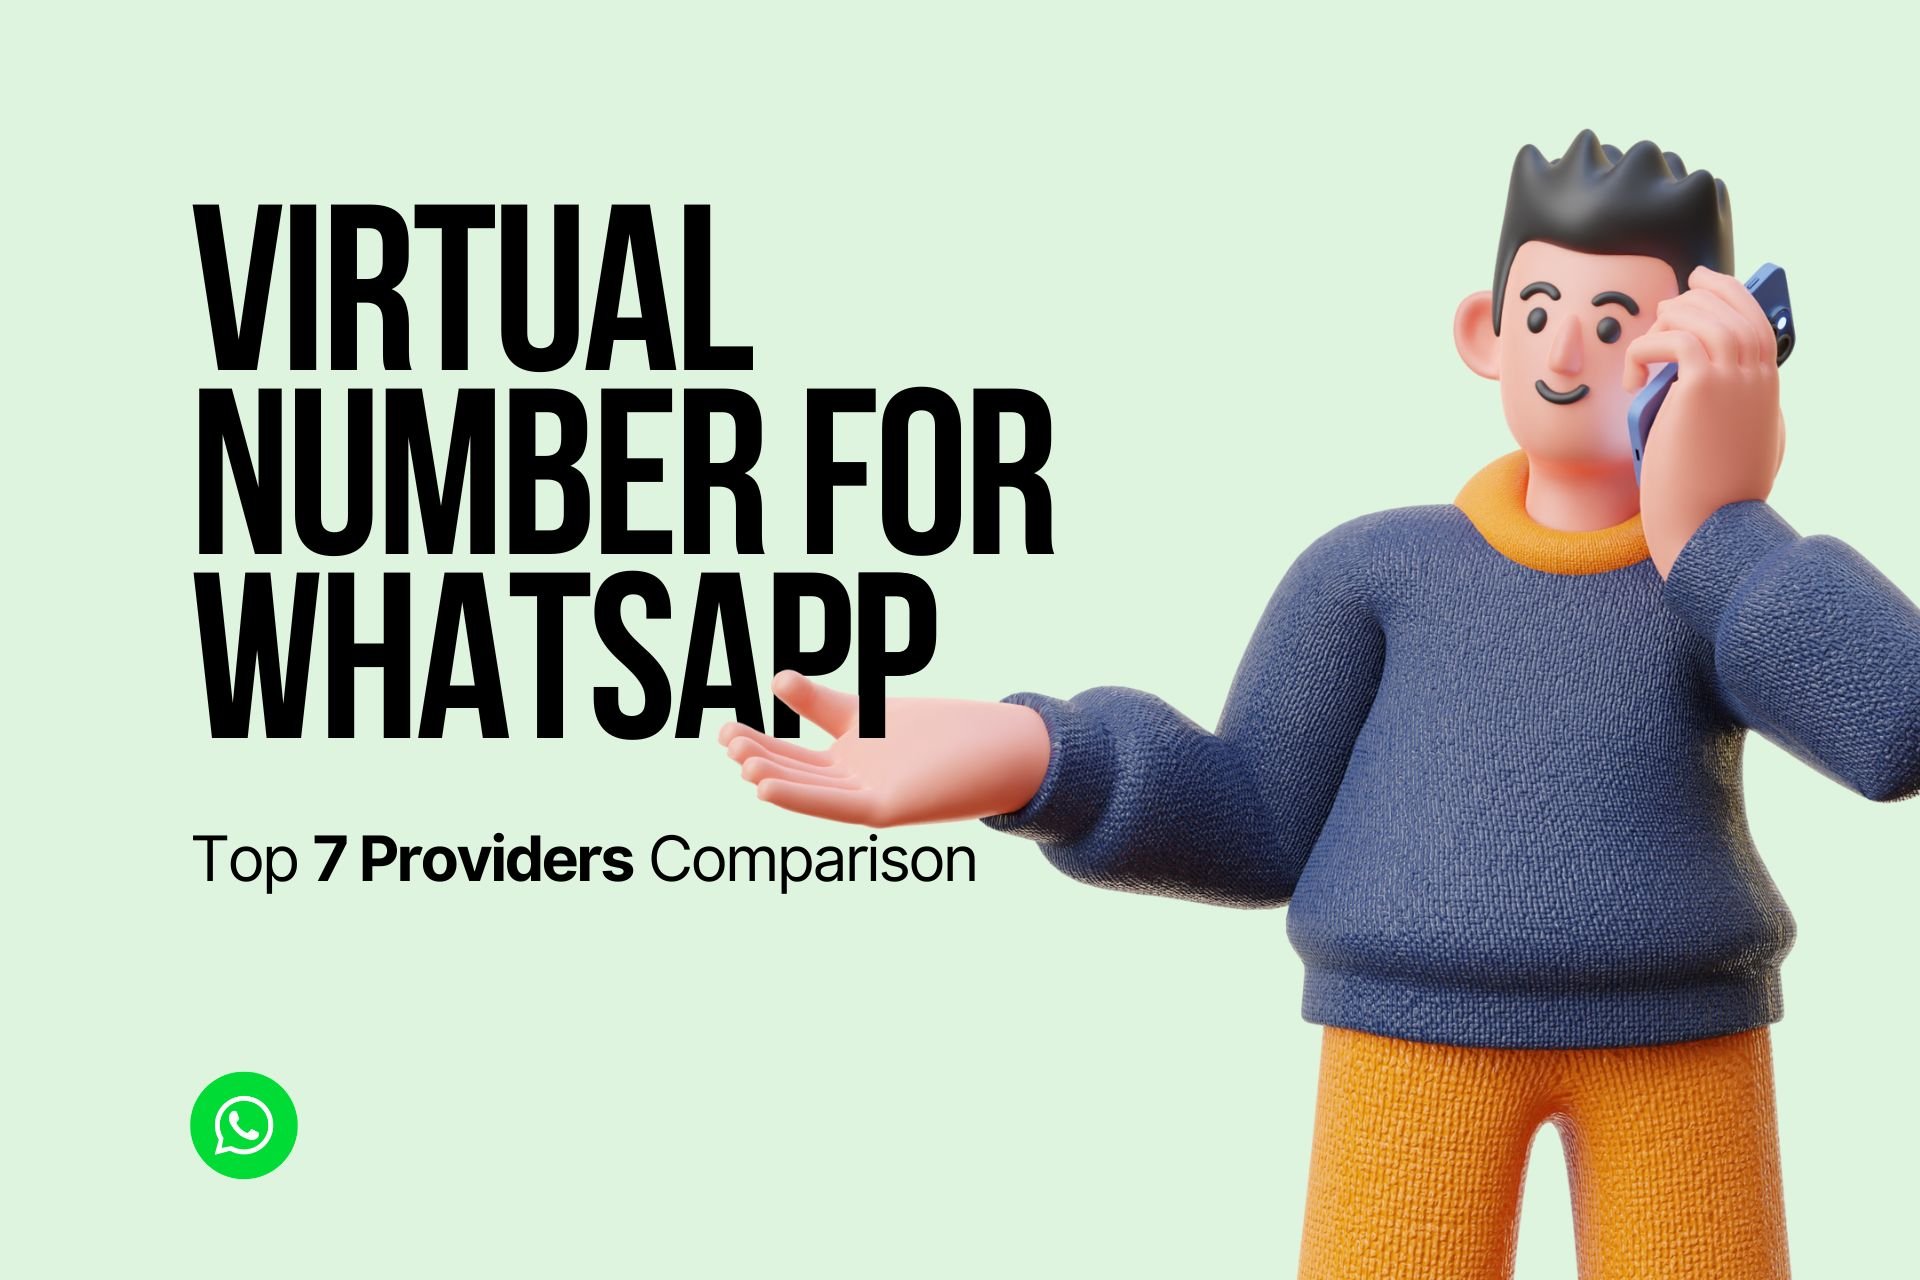 Virtual Number for WhatsApp: Top 7 Providers Comparison